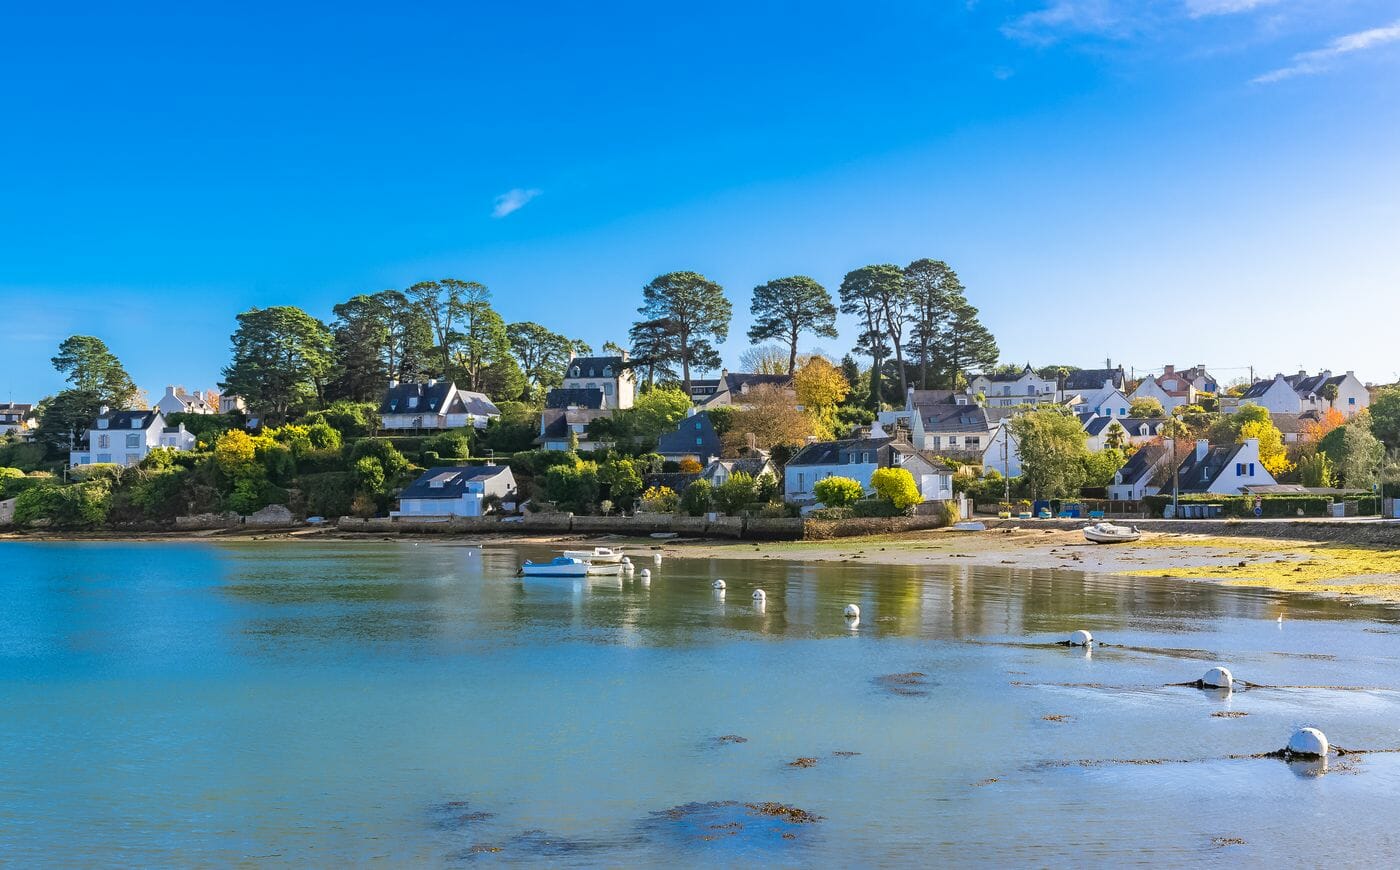 Brittany, Ile aux Moines island in the Morbihan gulf, the typical harbor and village, low tide